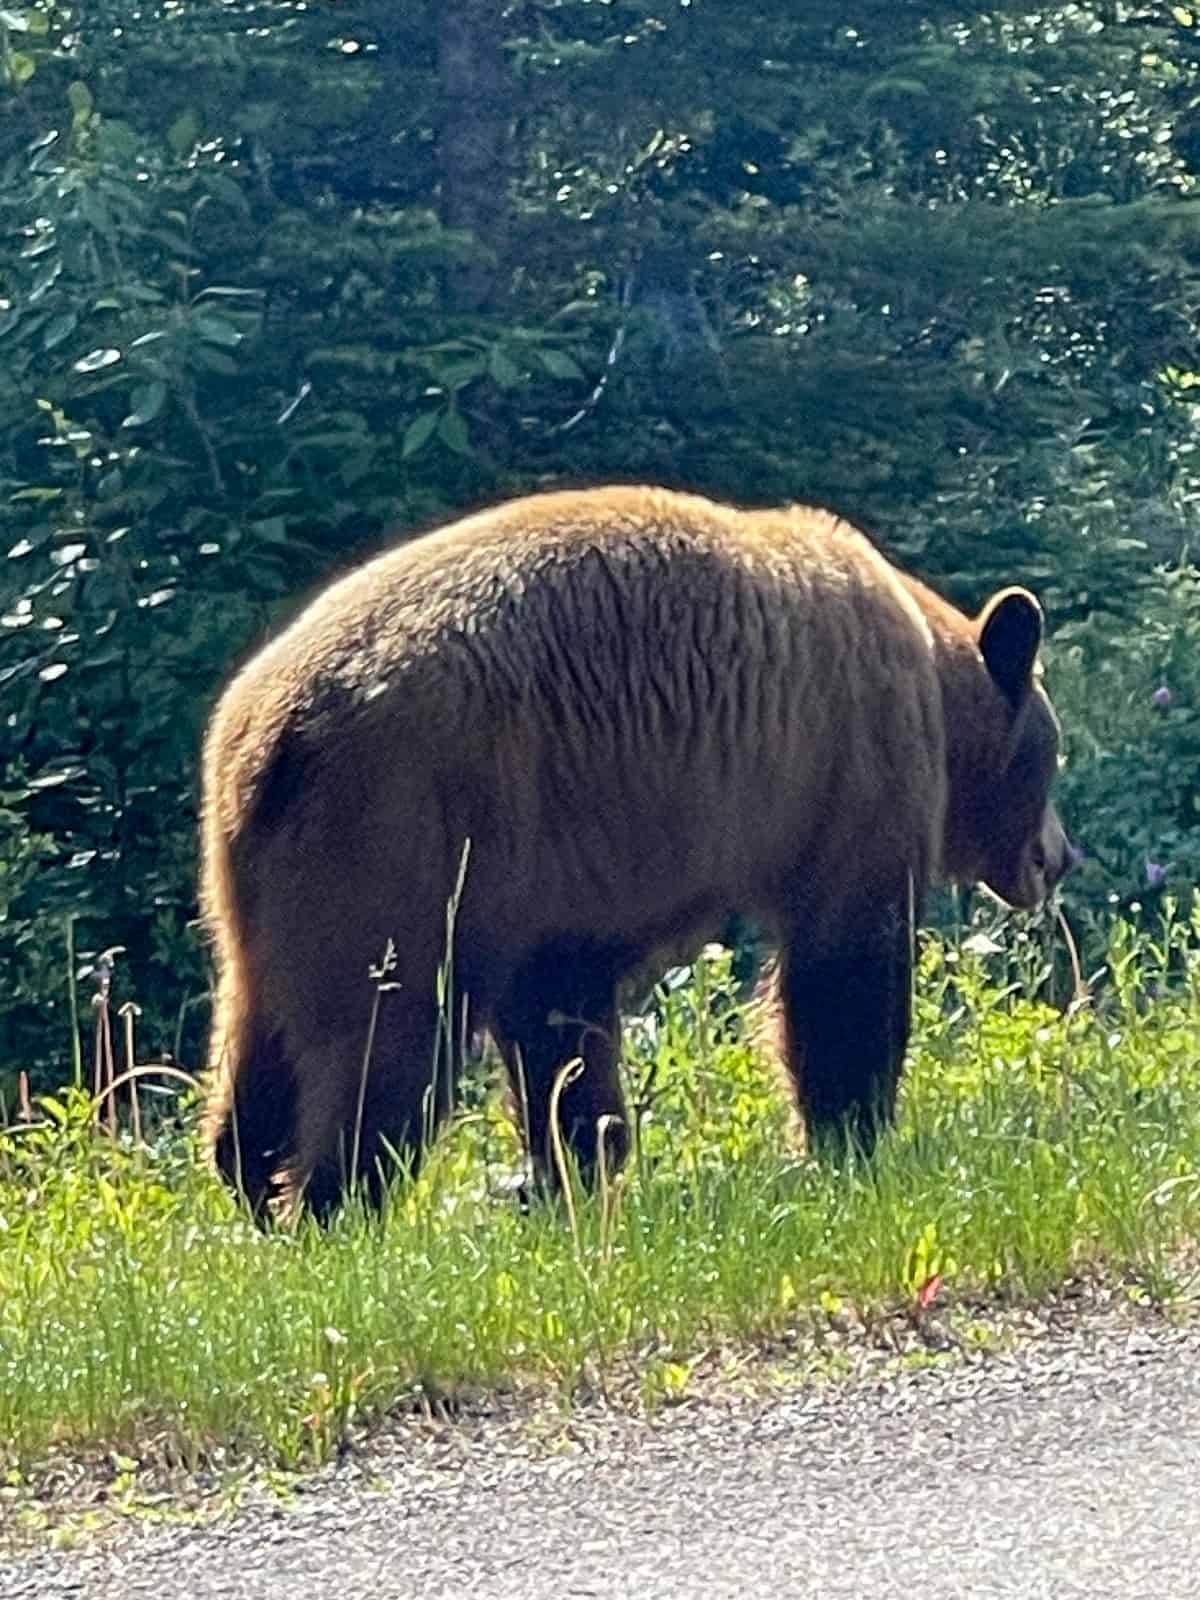 A grizzly bear beside the road.